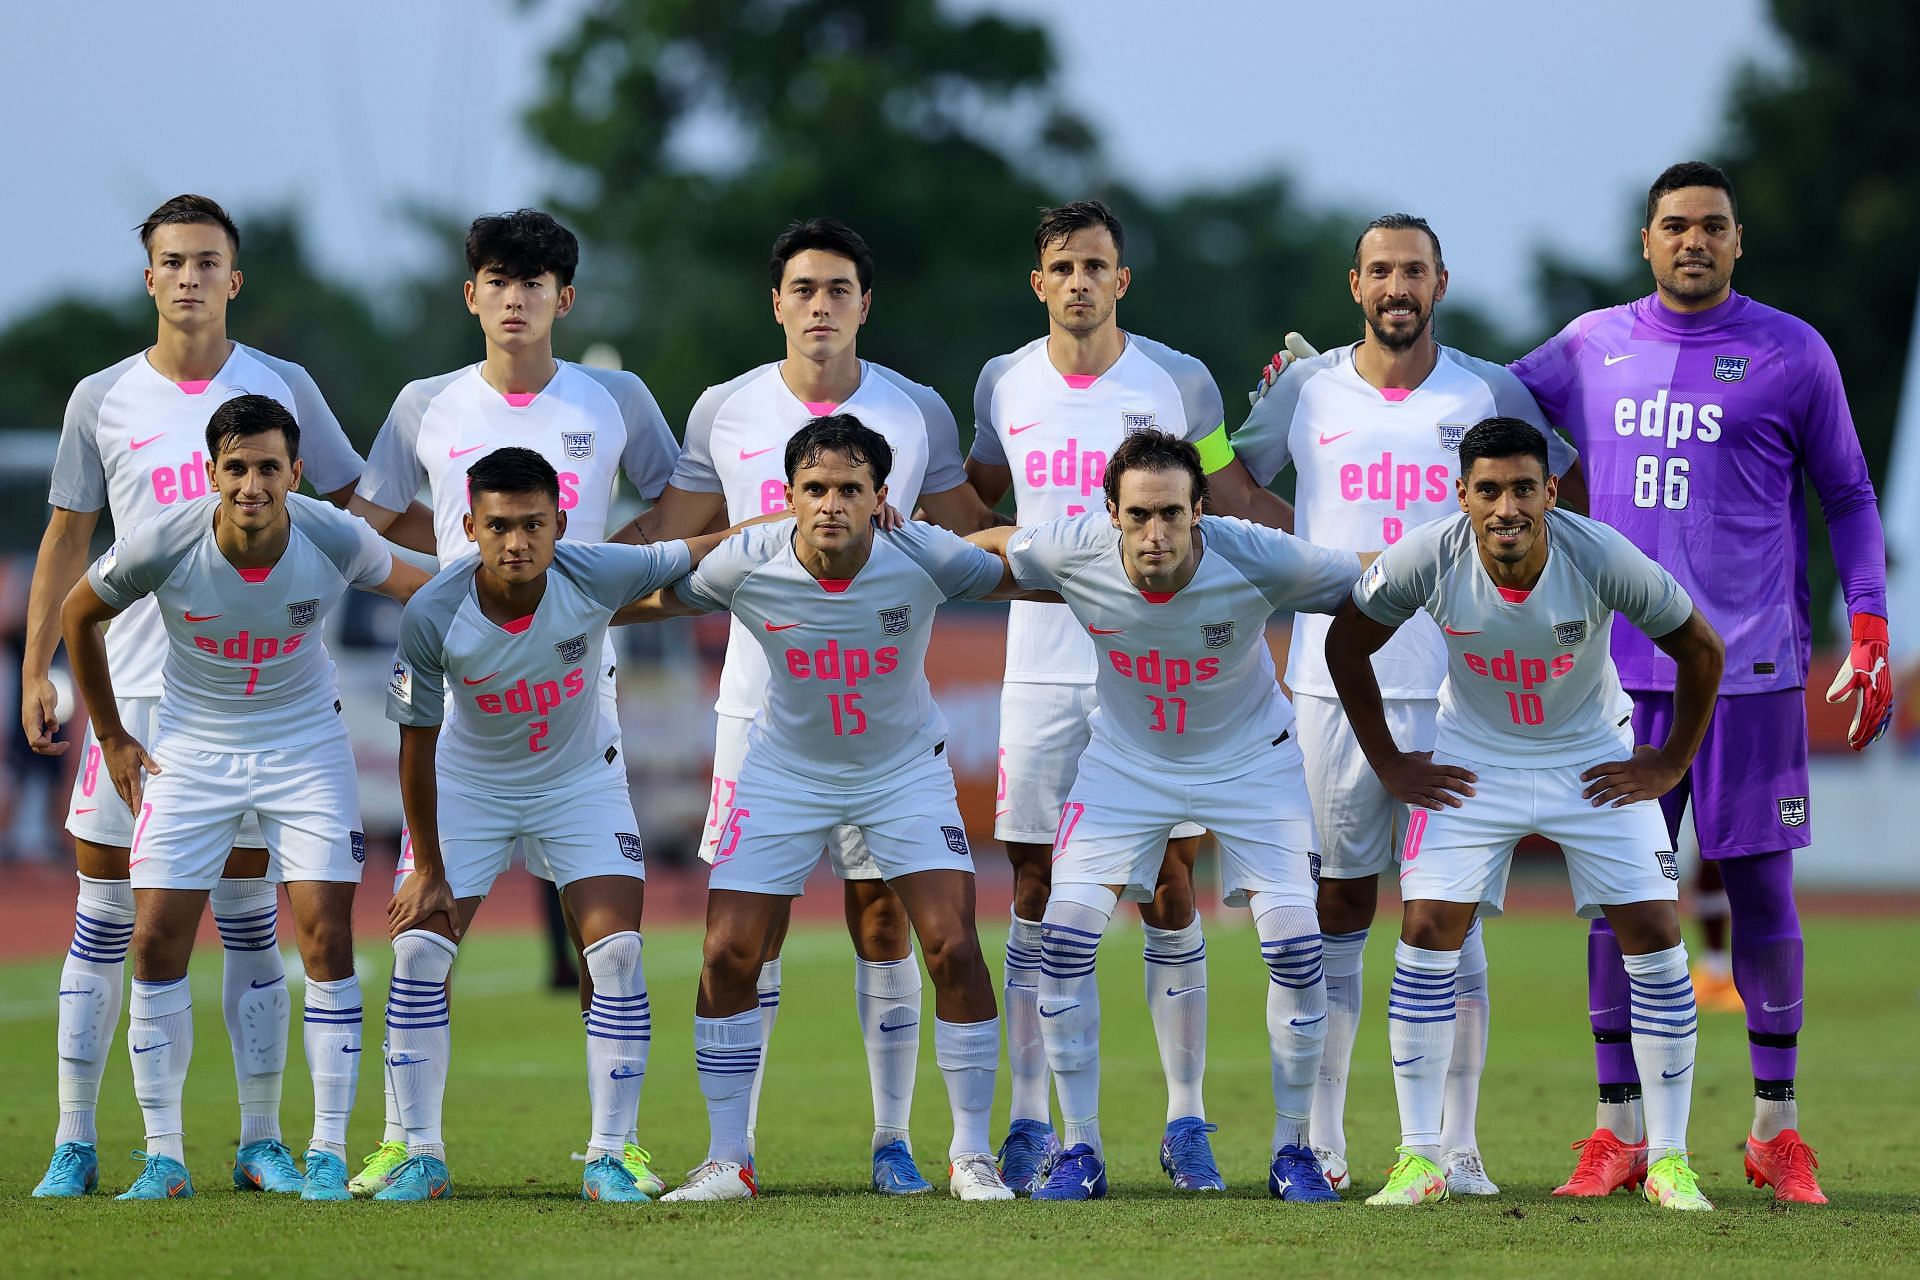 Kitchee SC will face Chiangrai United on Thursday